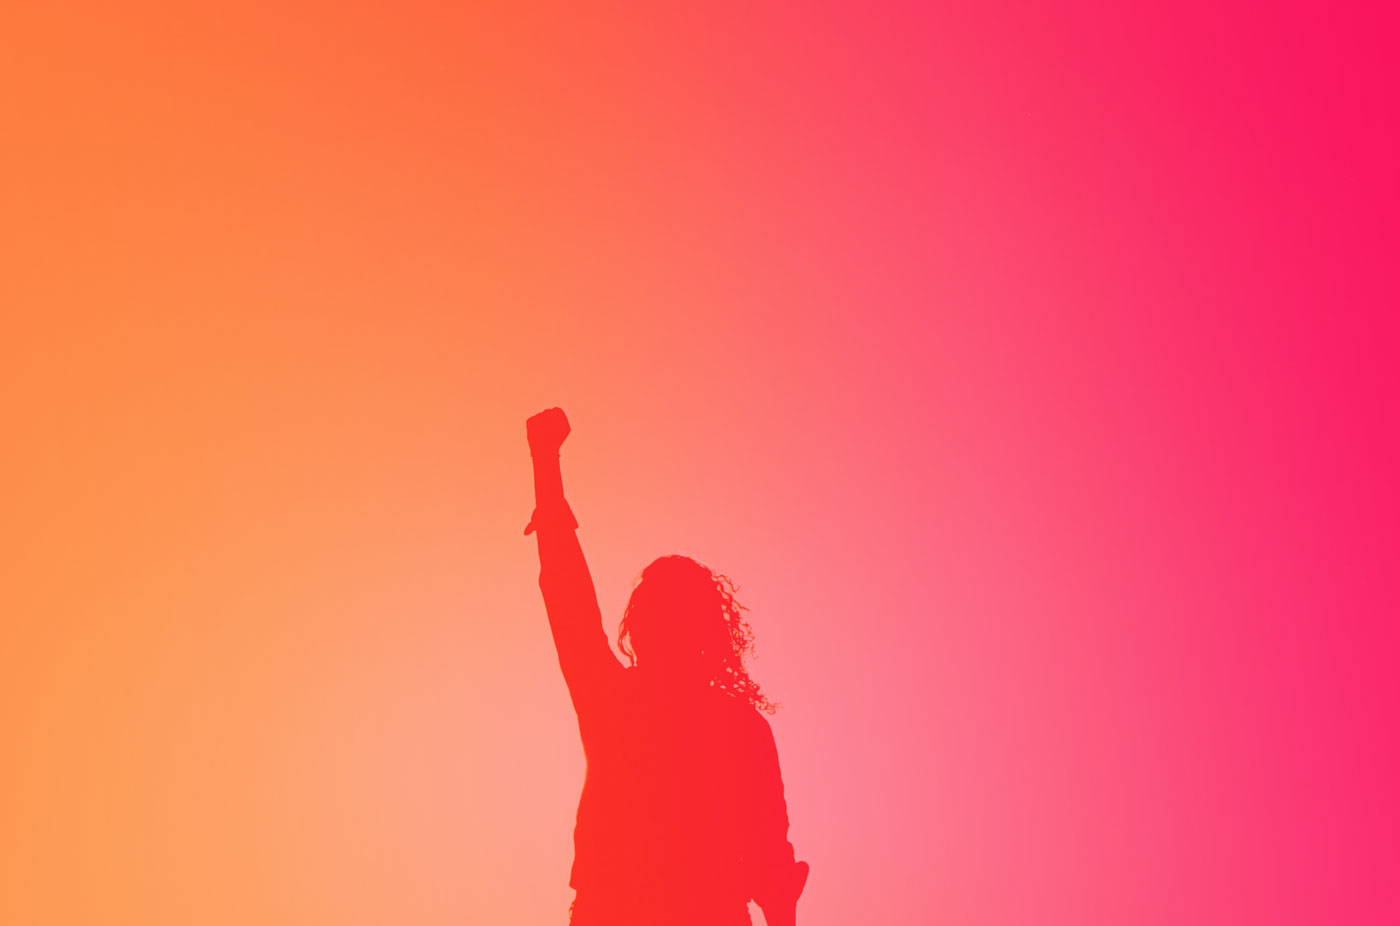 Silhouette of a woman holder her hand up in the air in a gesture of power